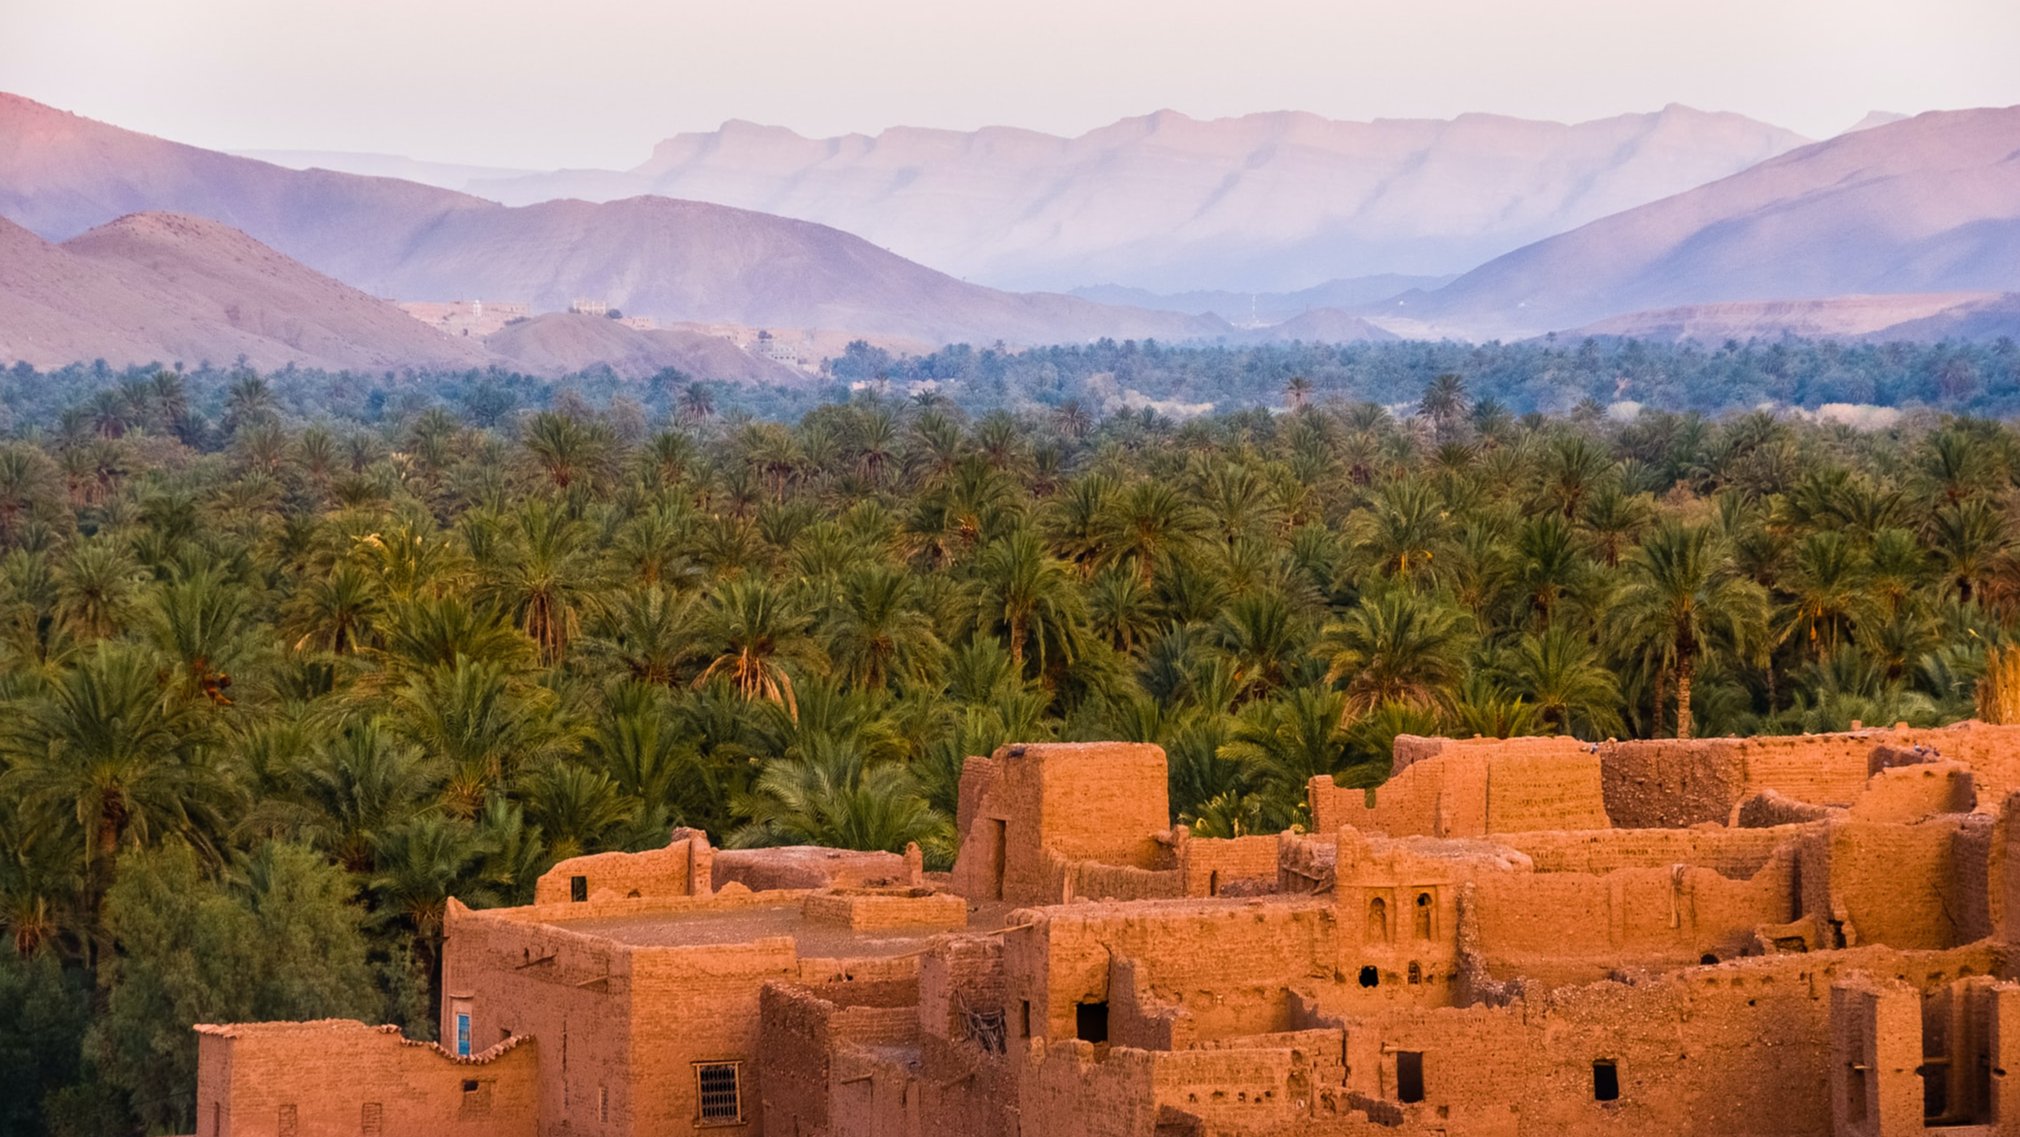 morocco-is-the-northwesternmost-country-in-the-maghreb-region-of-north-africa-bordering-the